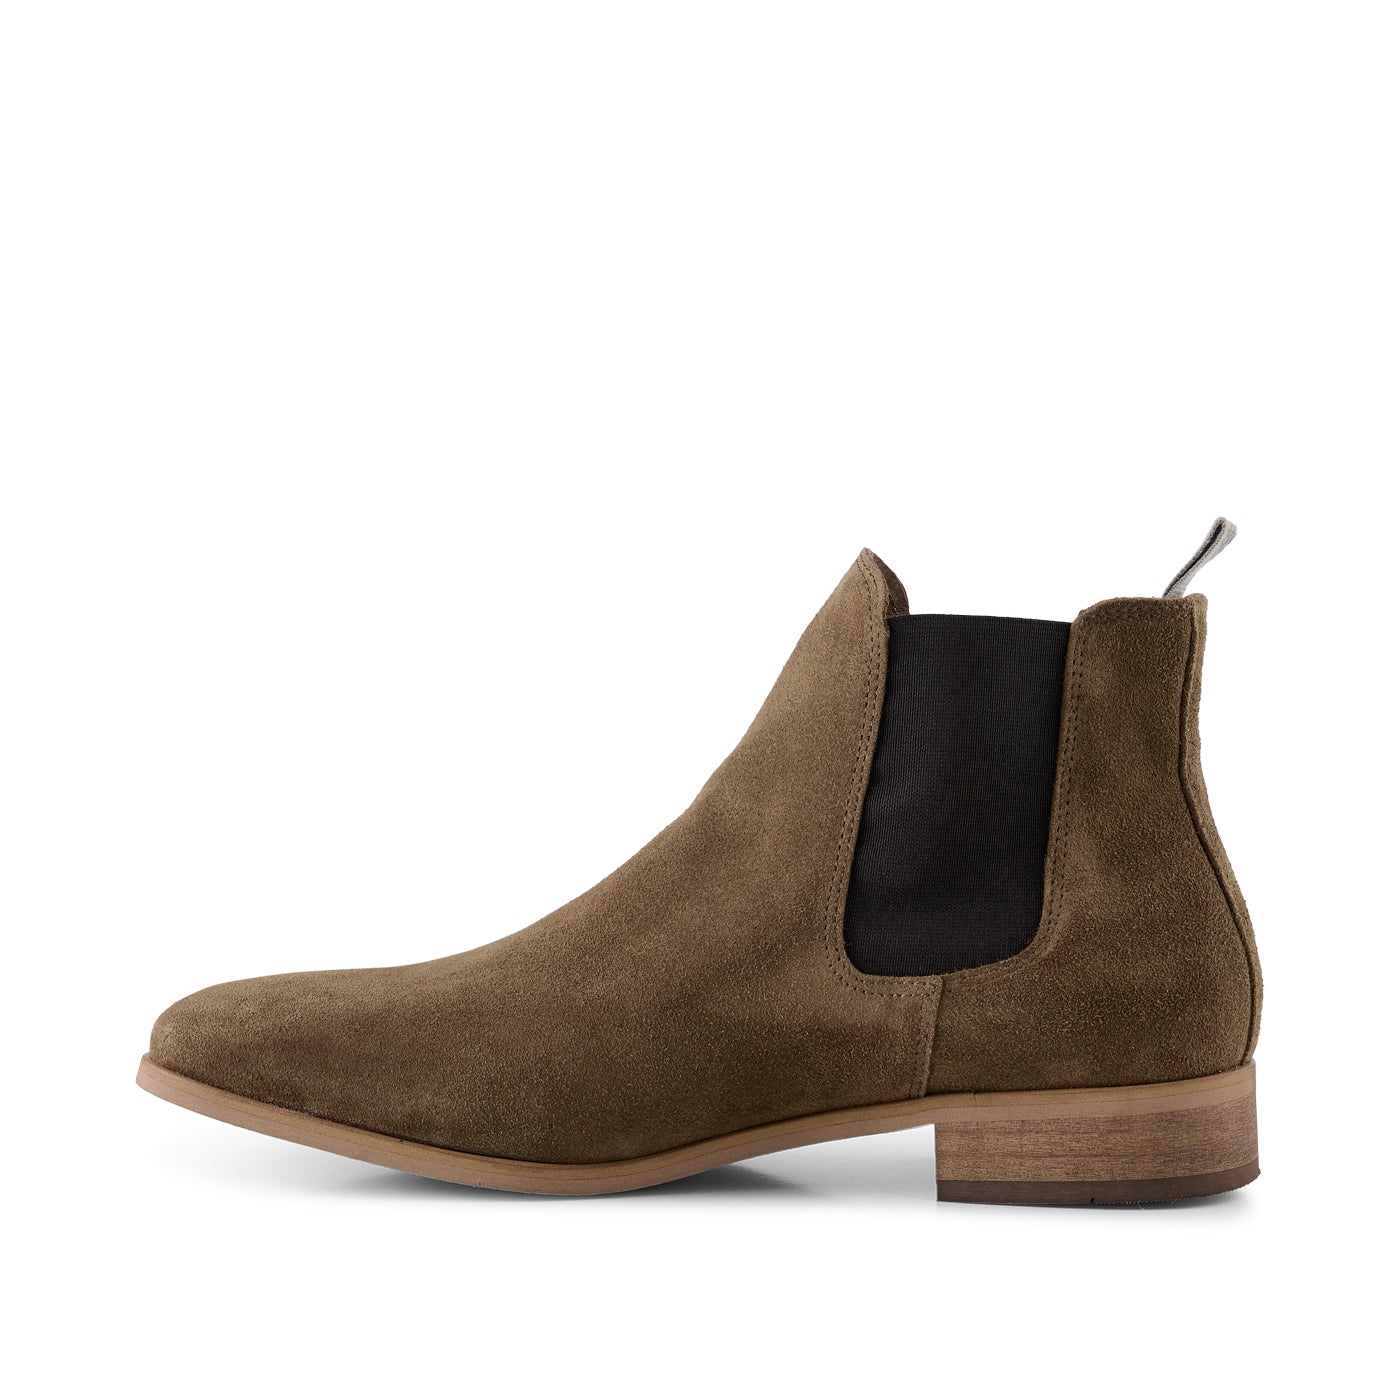 Dev chelsea boot suede - TOBACCO – SHOE THE BEAR -